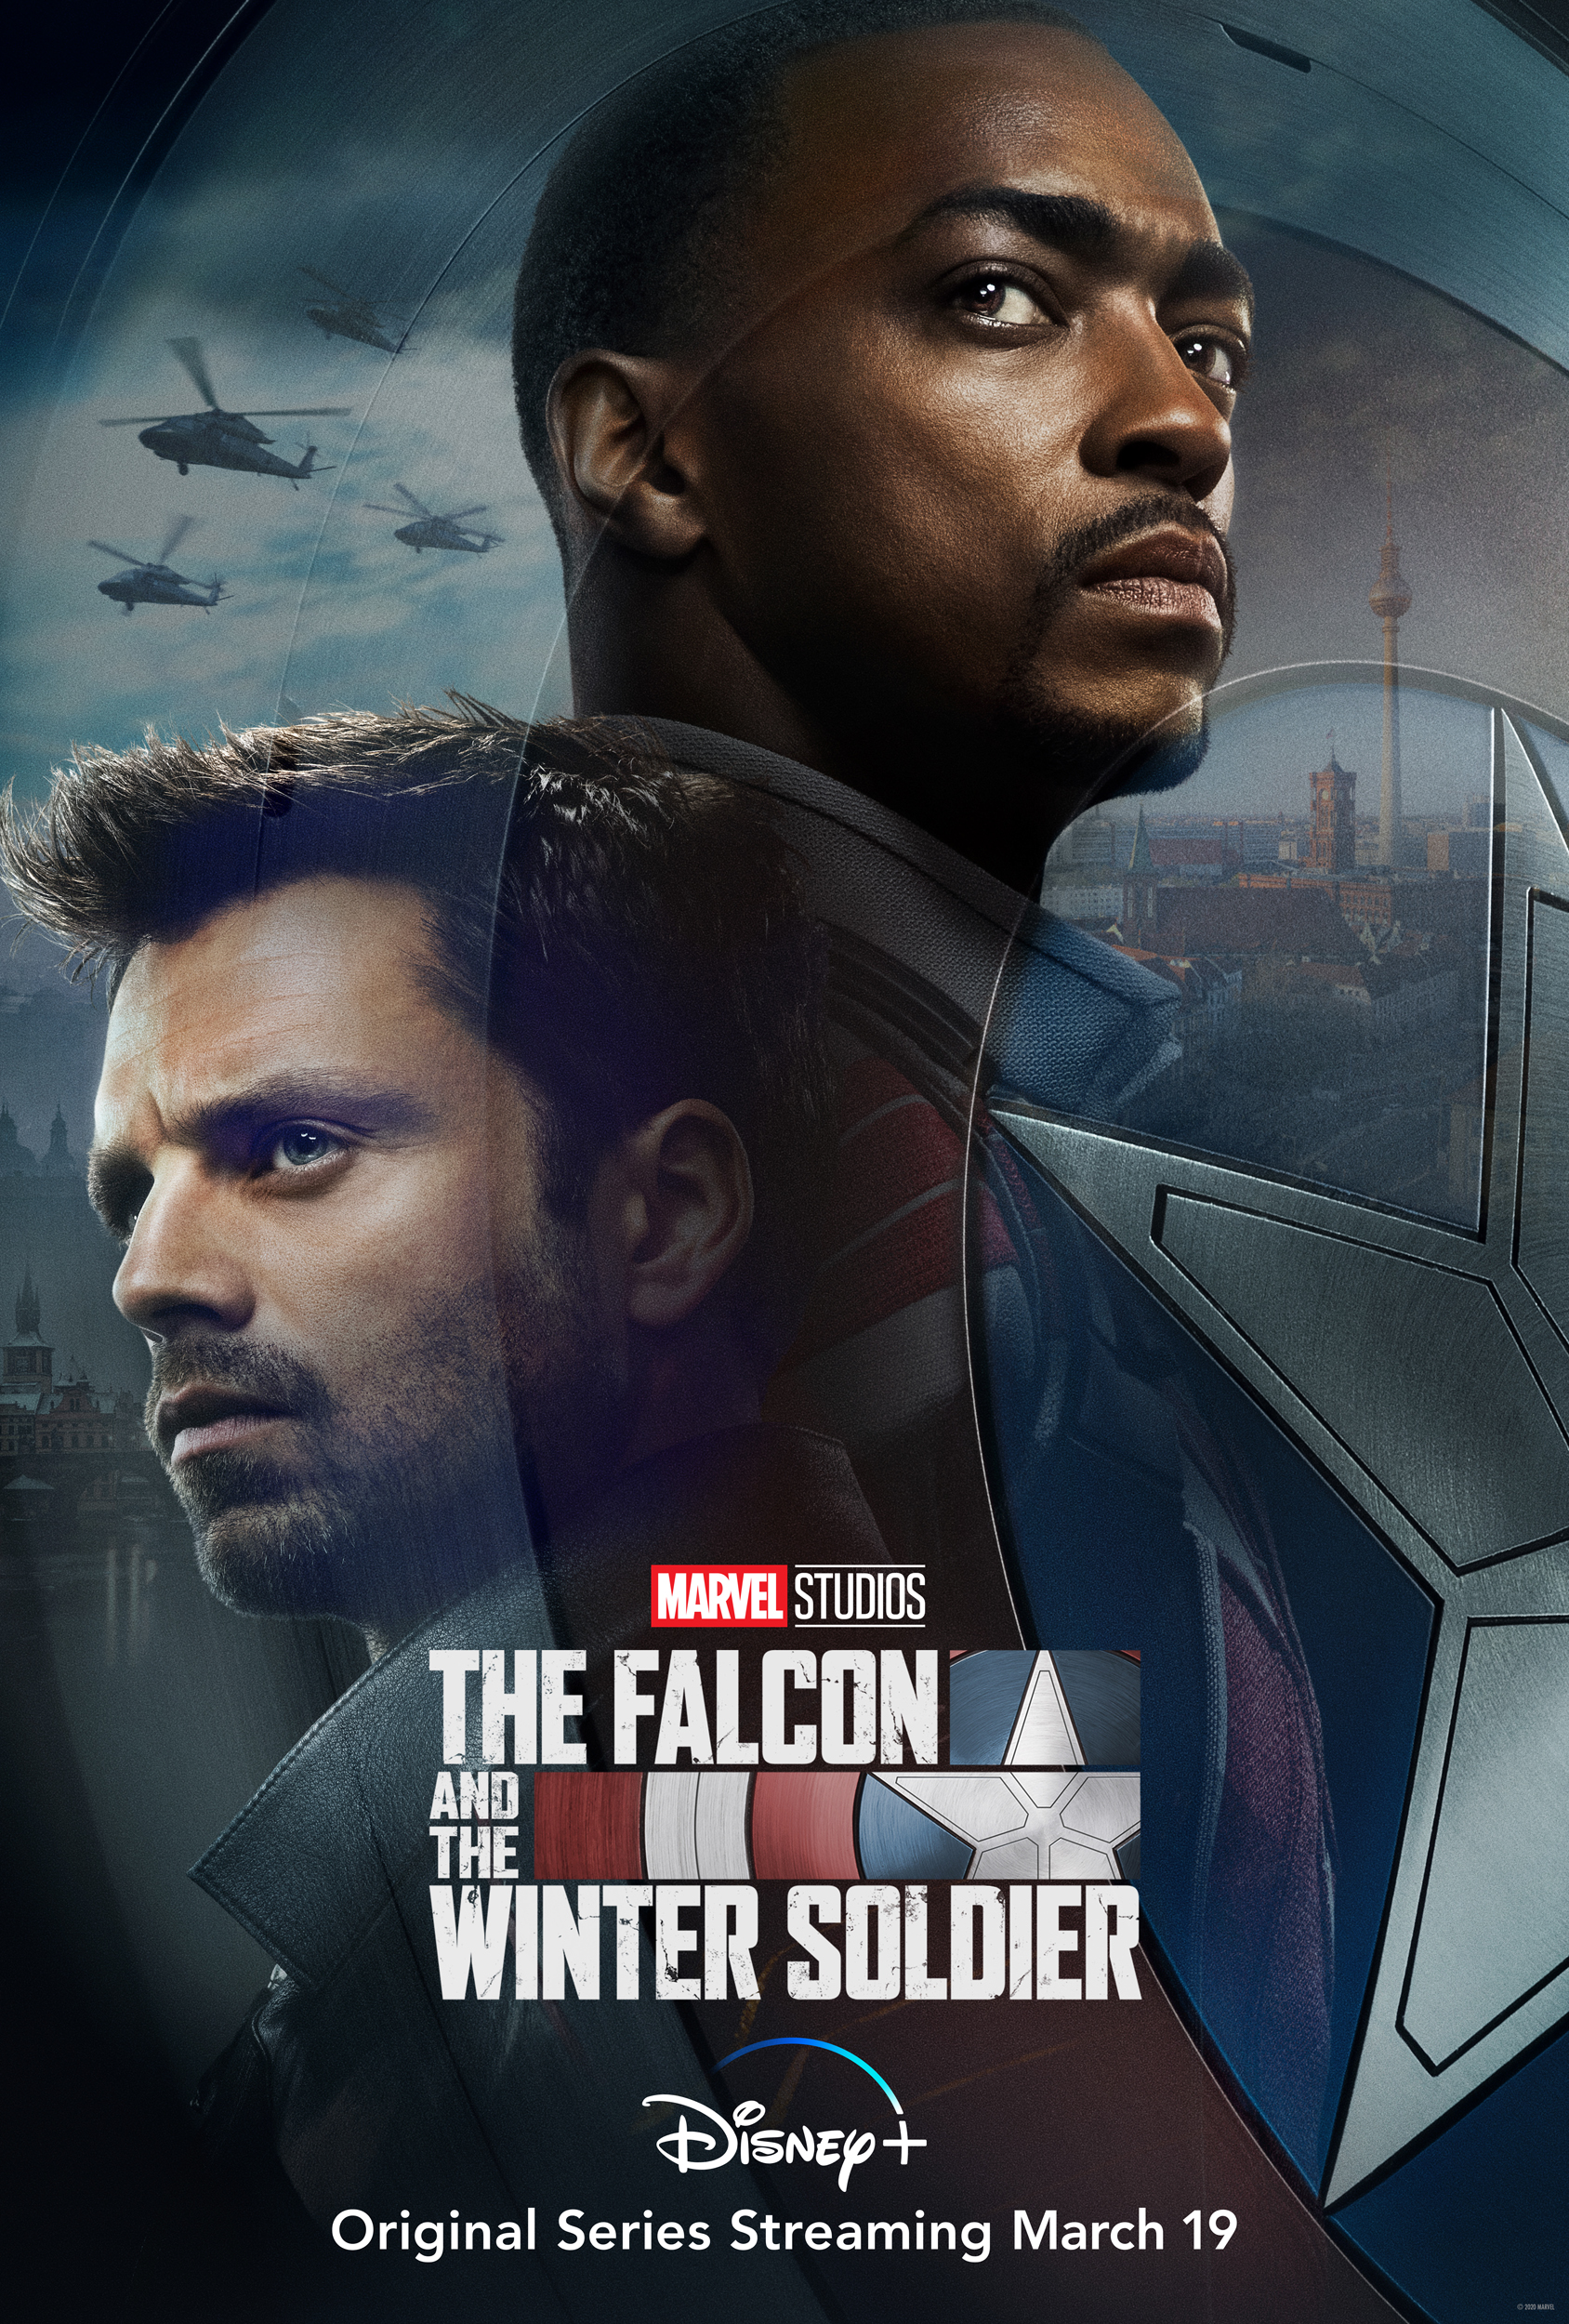 First Look: The Falcon And The Winter Soldier Starring Anthony Mackie